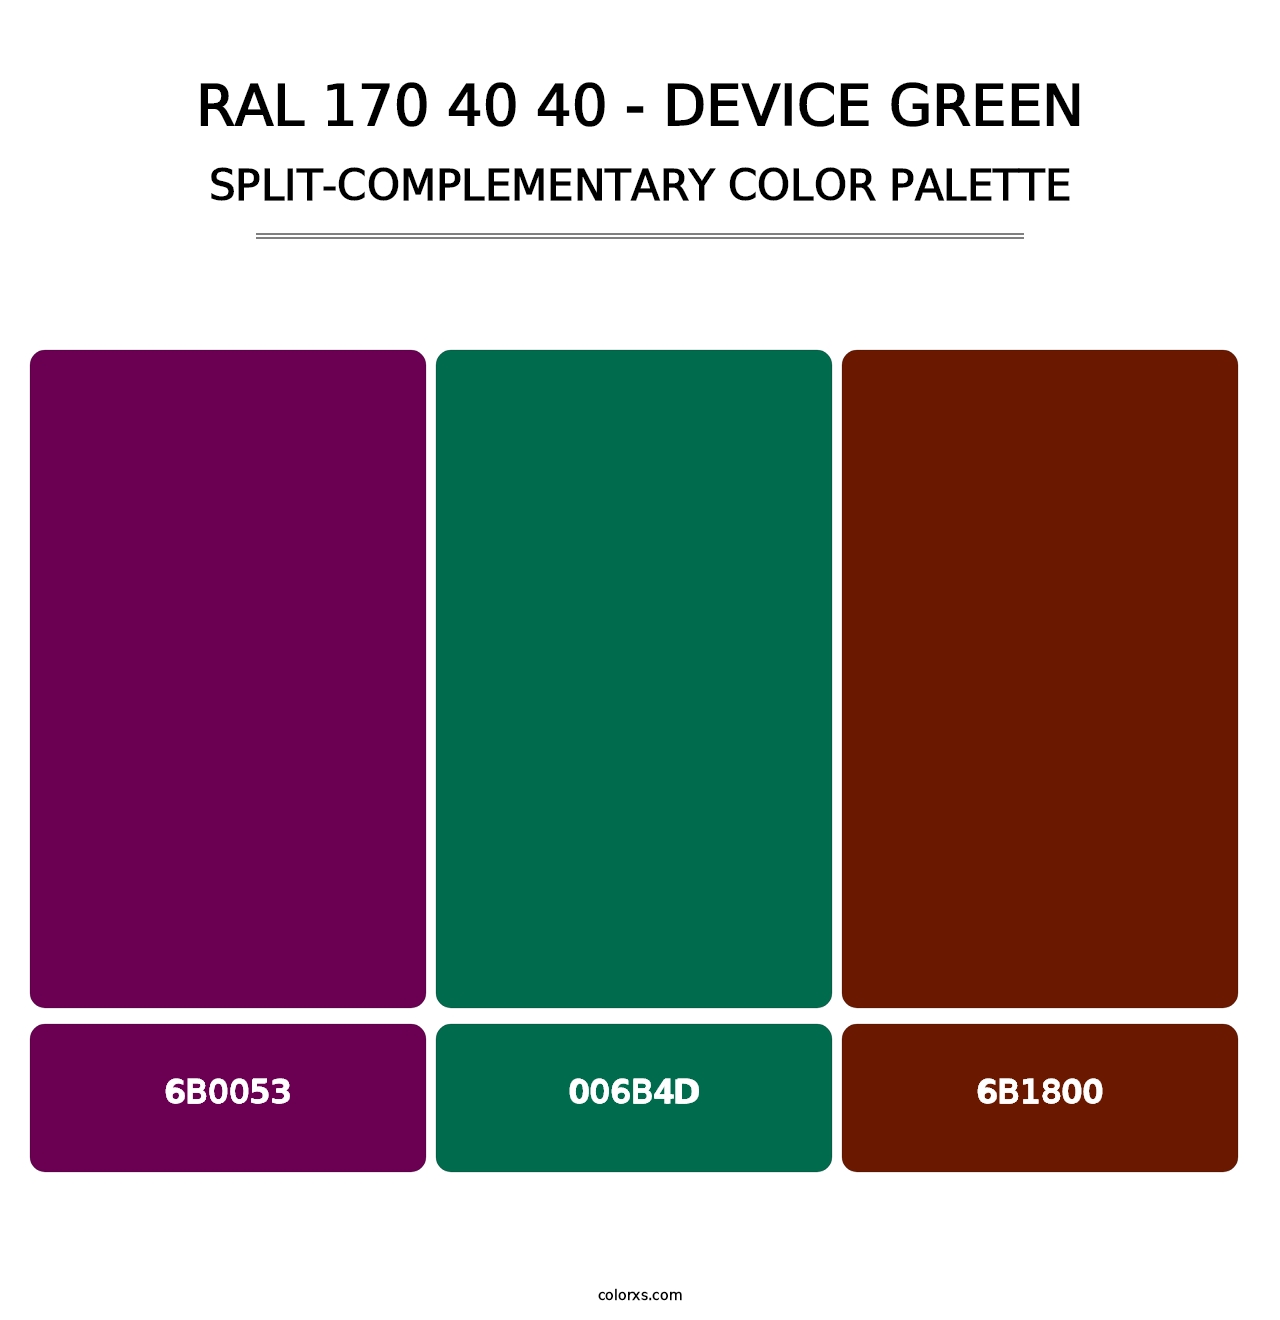 RAL 170 40 40 - Device Green - Split-Complementary Color Palette